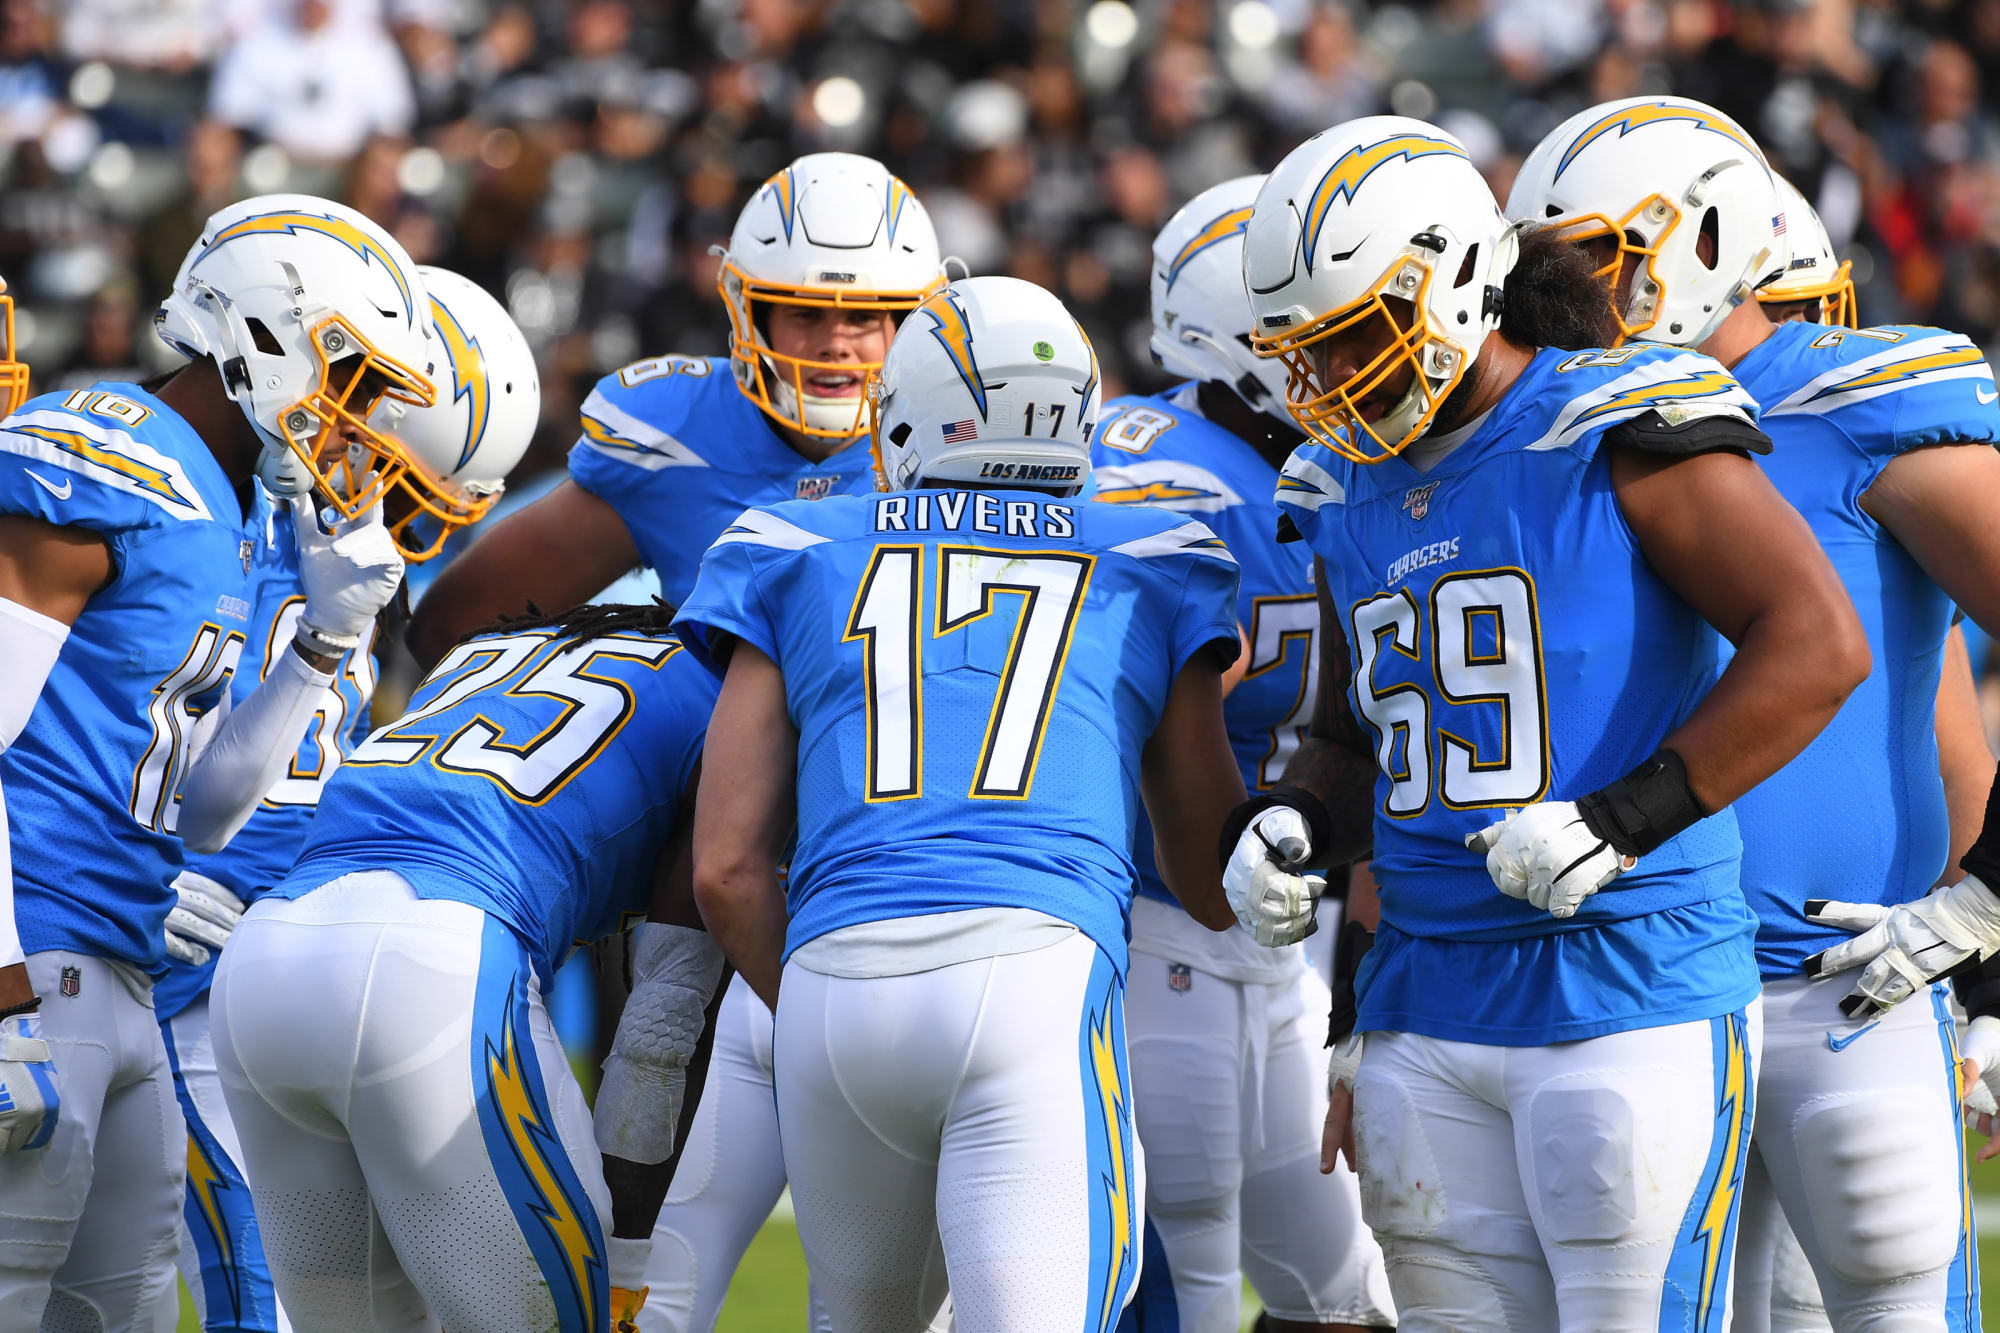 2020 chargers uniforms